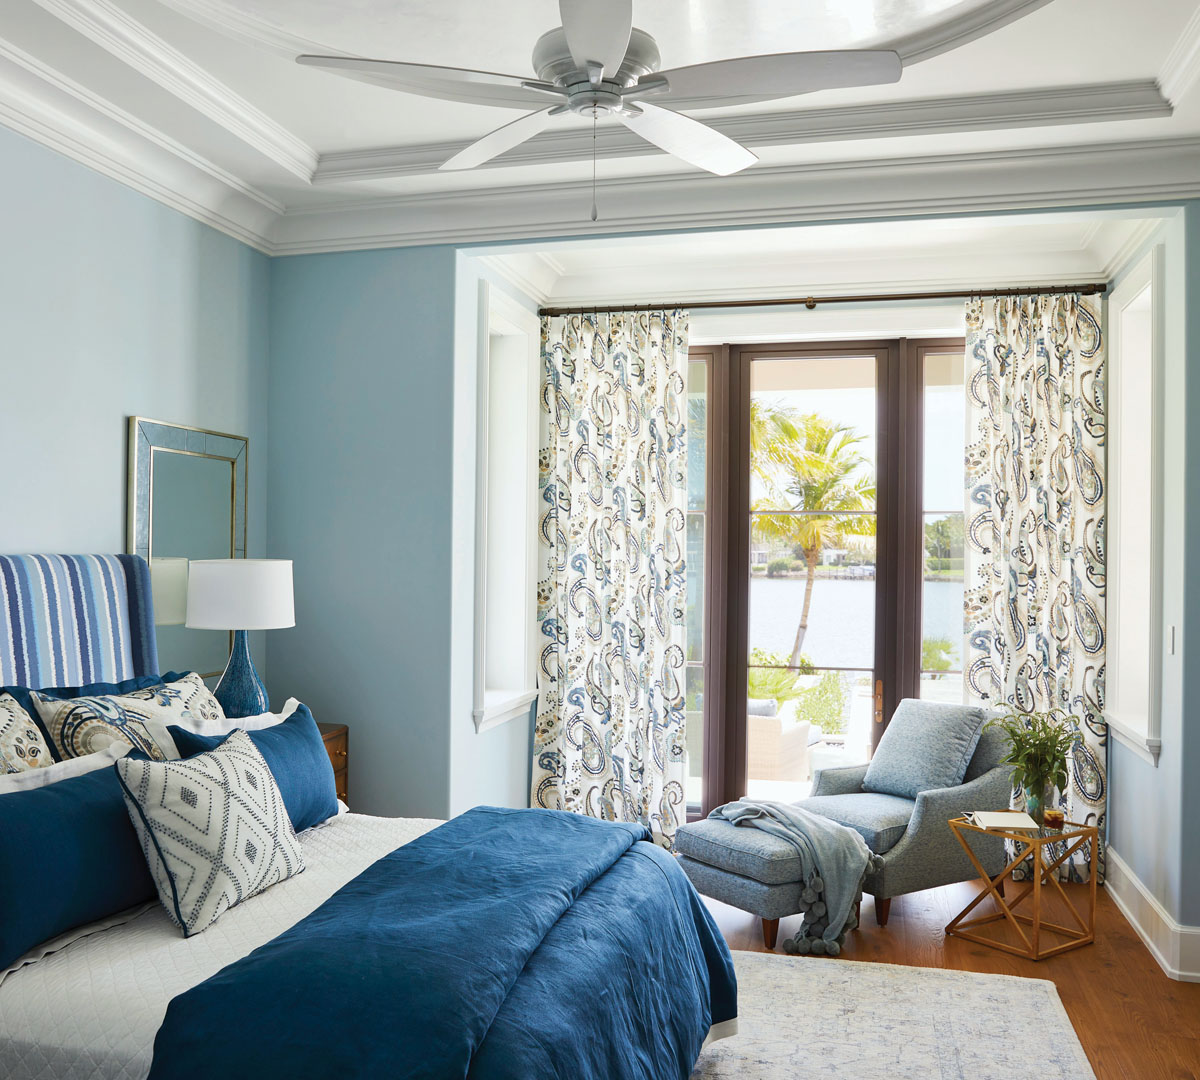 Each bedroom was designed to have its own vibe and special qualities. In this serene aqua and tan space, a chaise and ottoman from Highland House and a side table from Peach Tree Designs create a beguiling opportunity for moments of mindfulness.